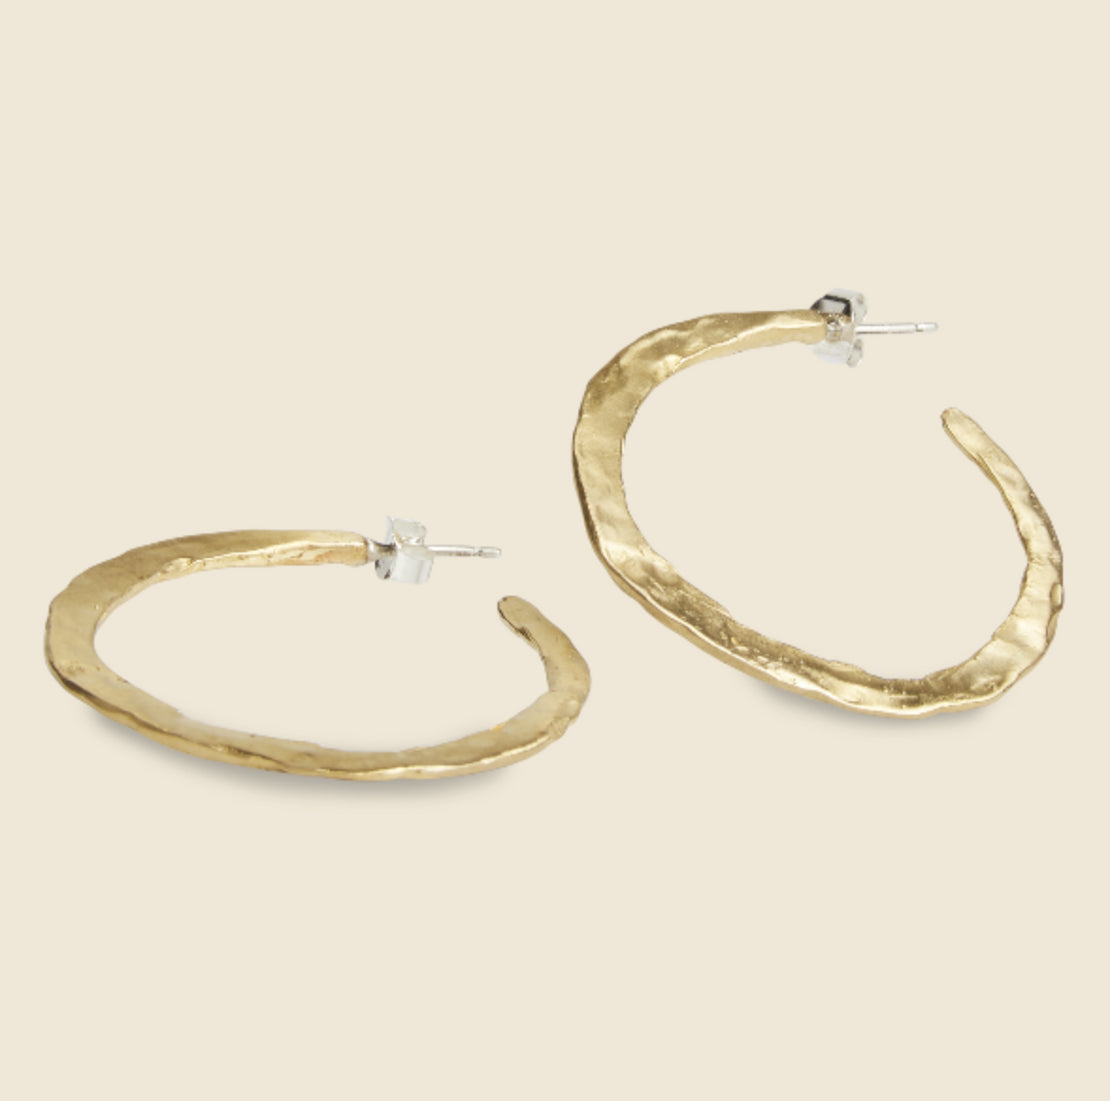 Hammered Hoop Earrings - Brass - 8.6.4 Design - STAG Provisions - W - Accessories - Earrings